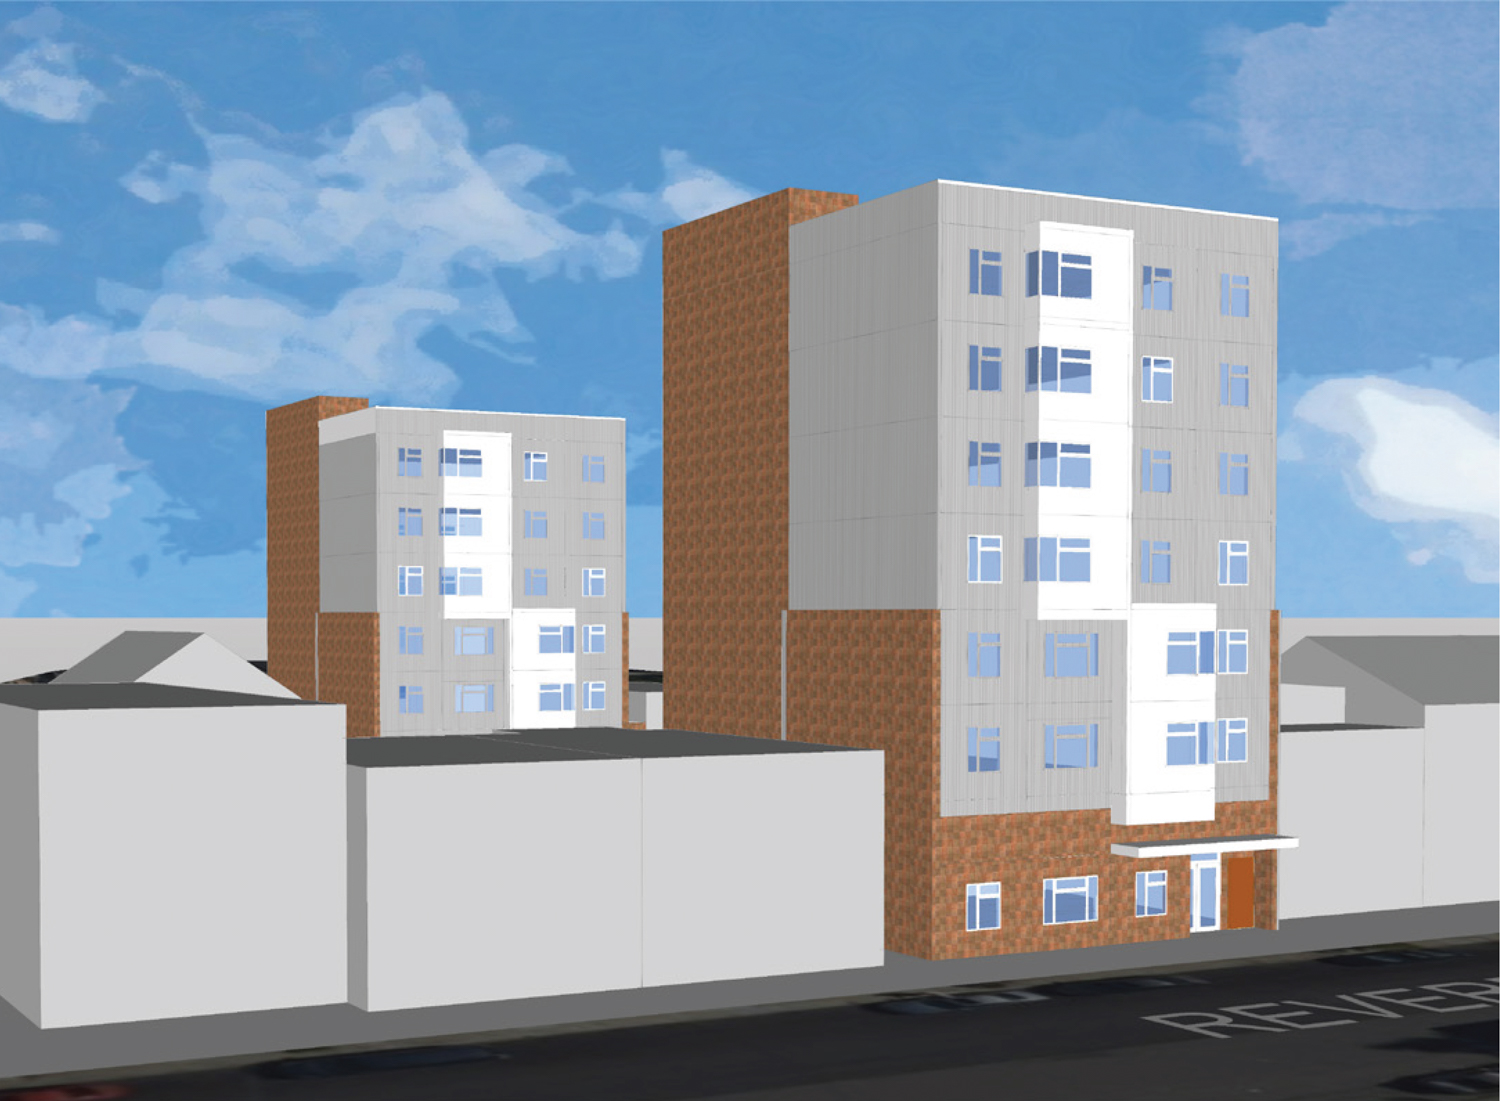 1311 Quesada Avenue seen from Revere Avenue, rendering by Gelfand Partners Architects